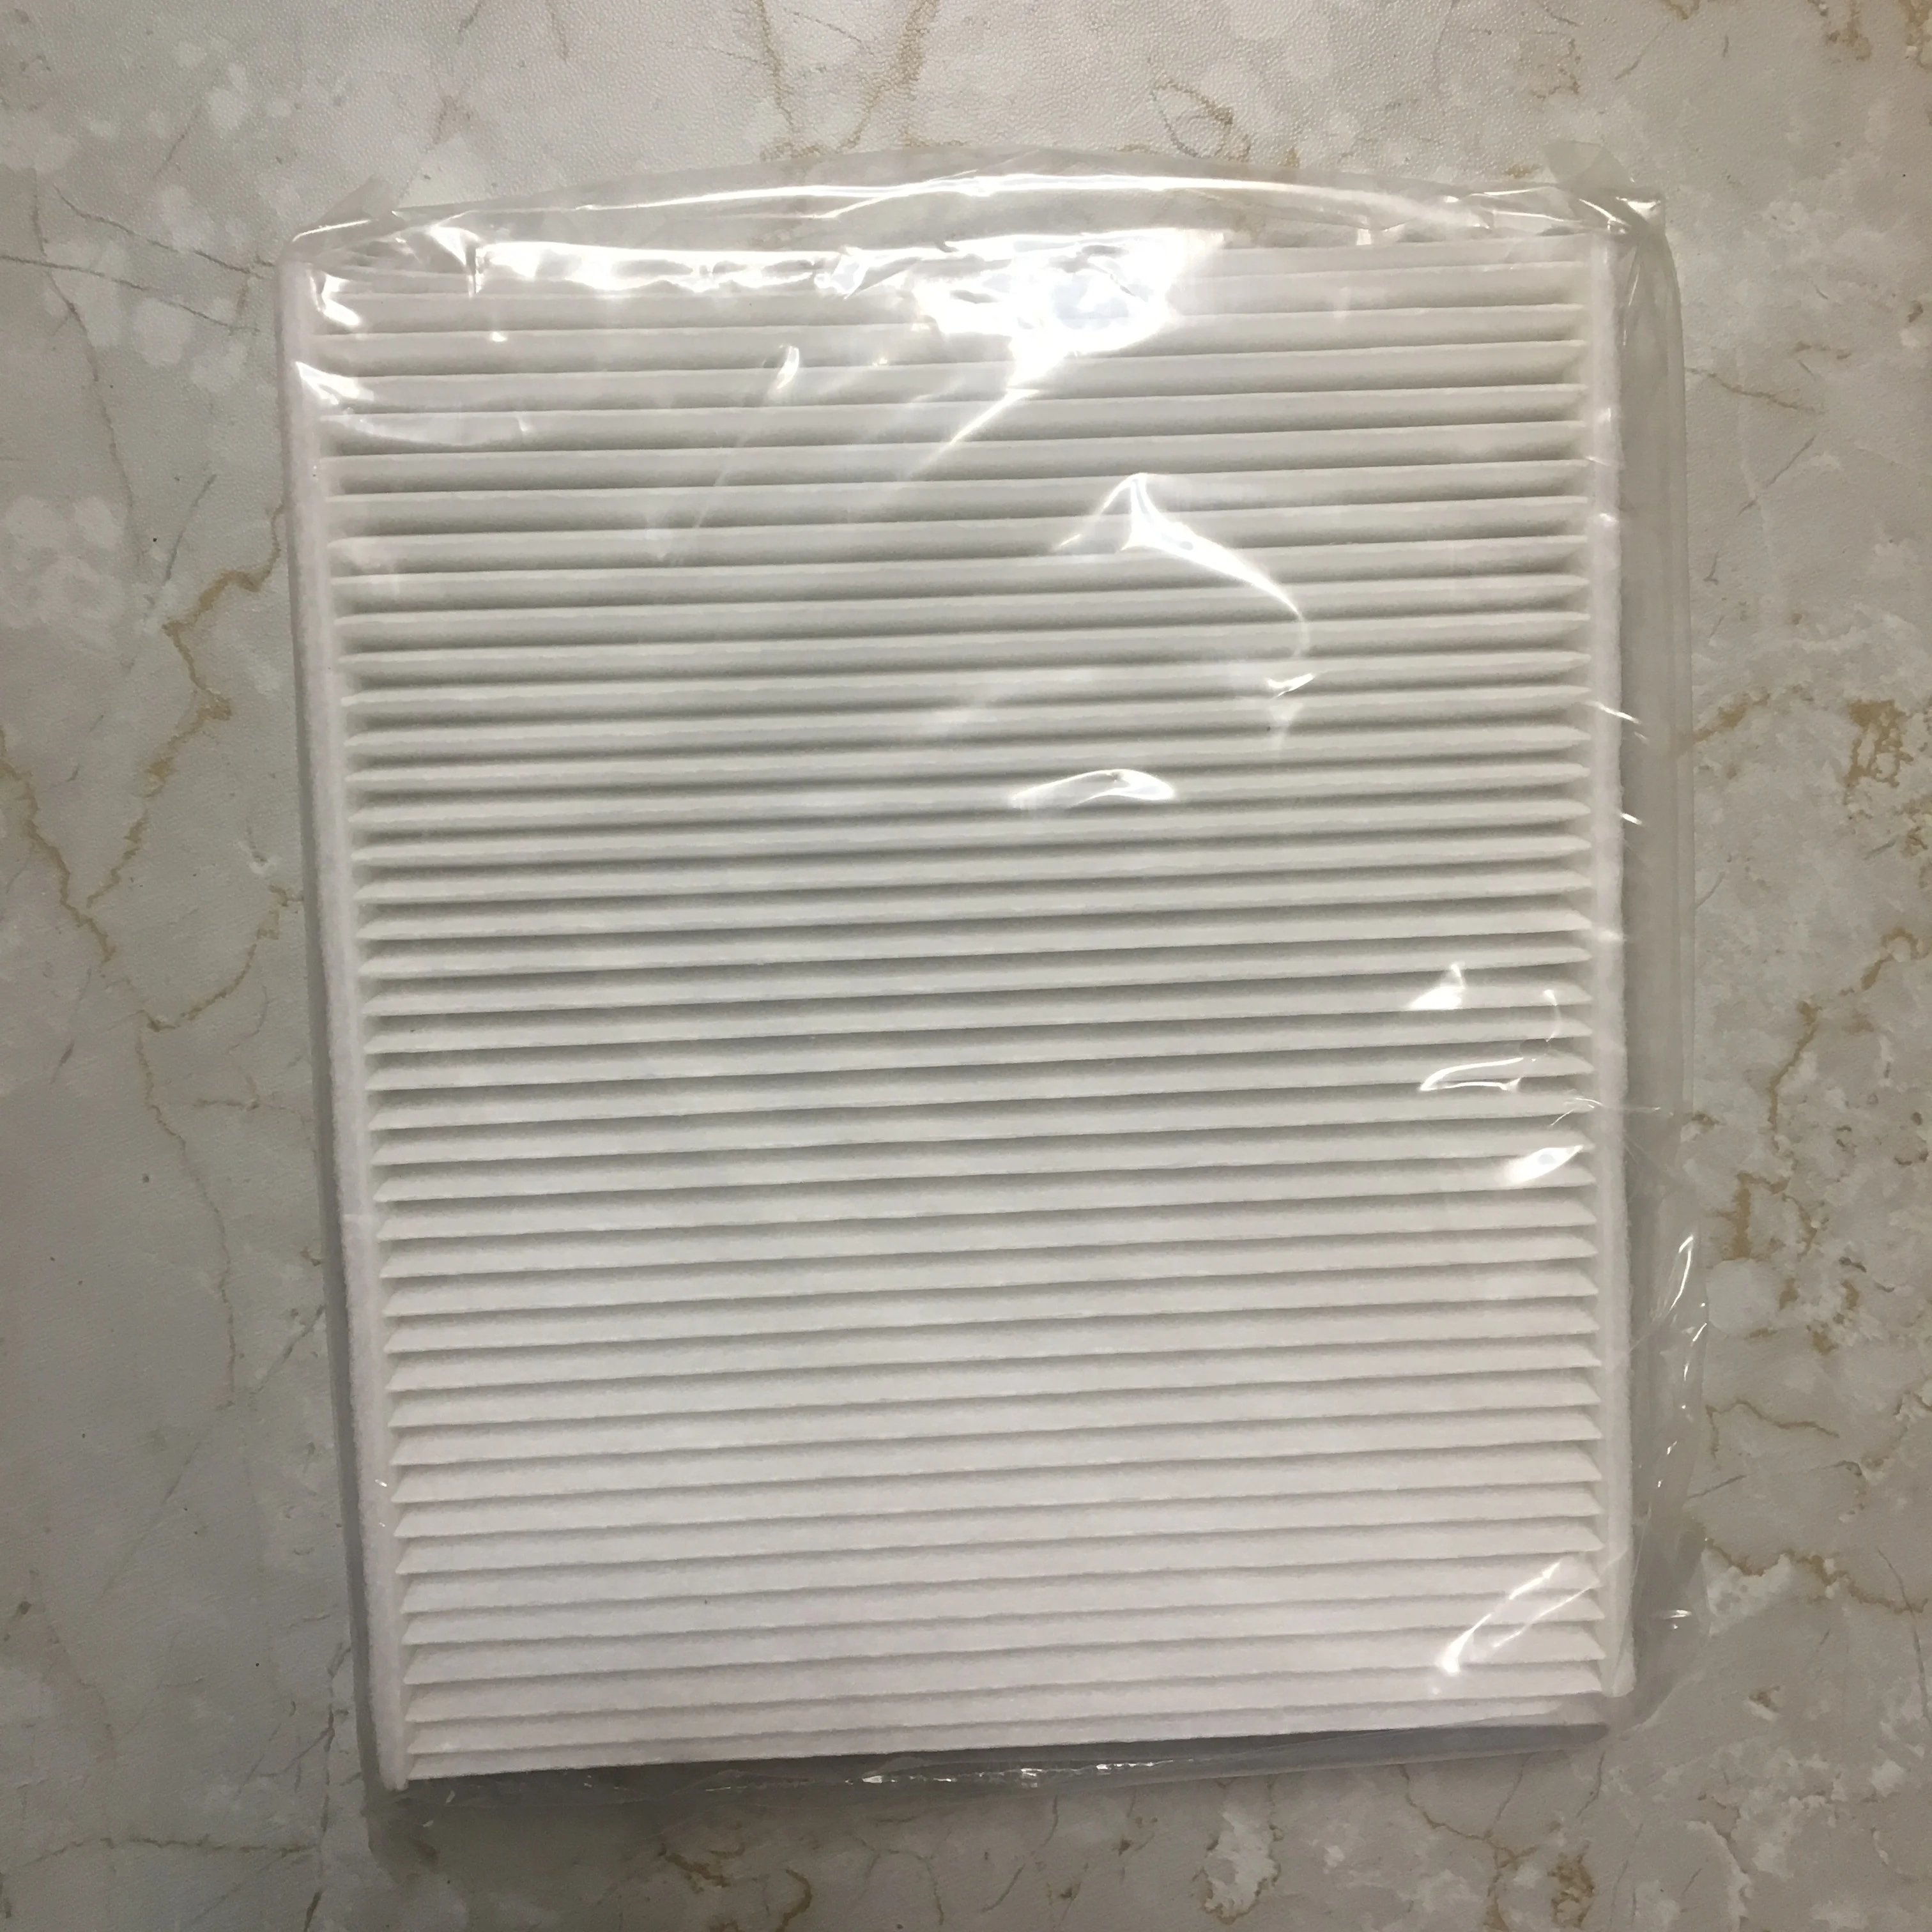 BMW E70 E71 OEM Cabin Air Filter for Recirculated Air Paper NEW X5 X6